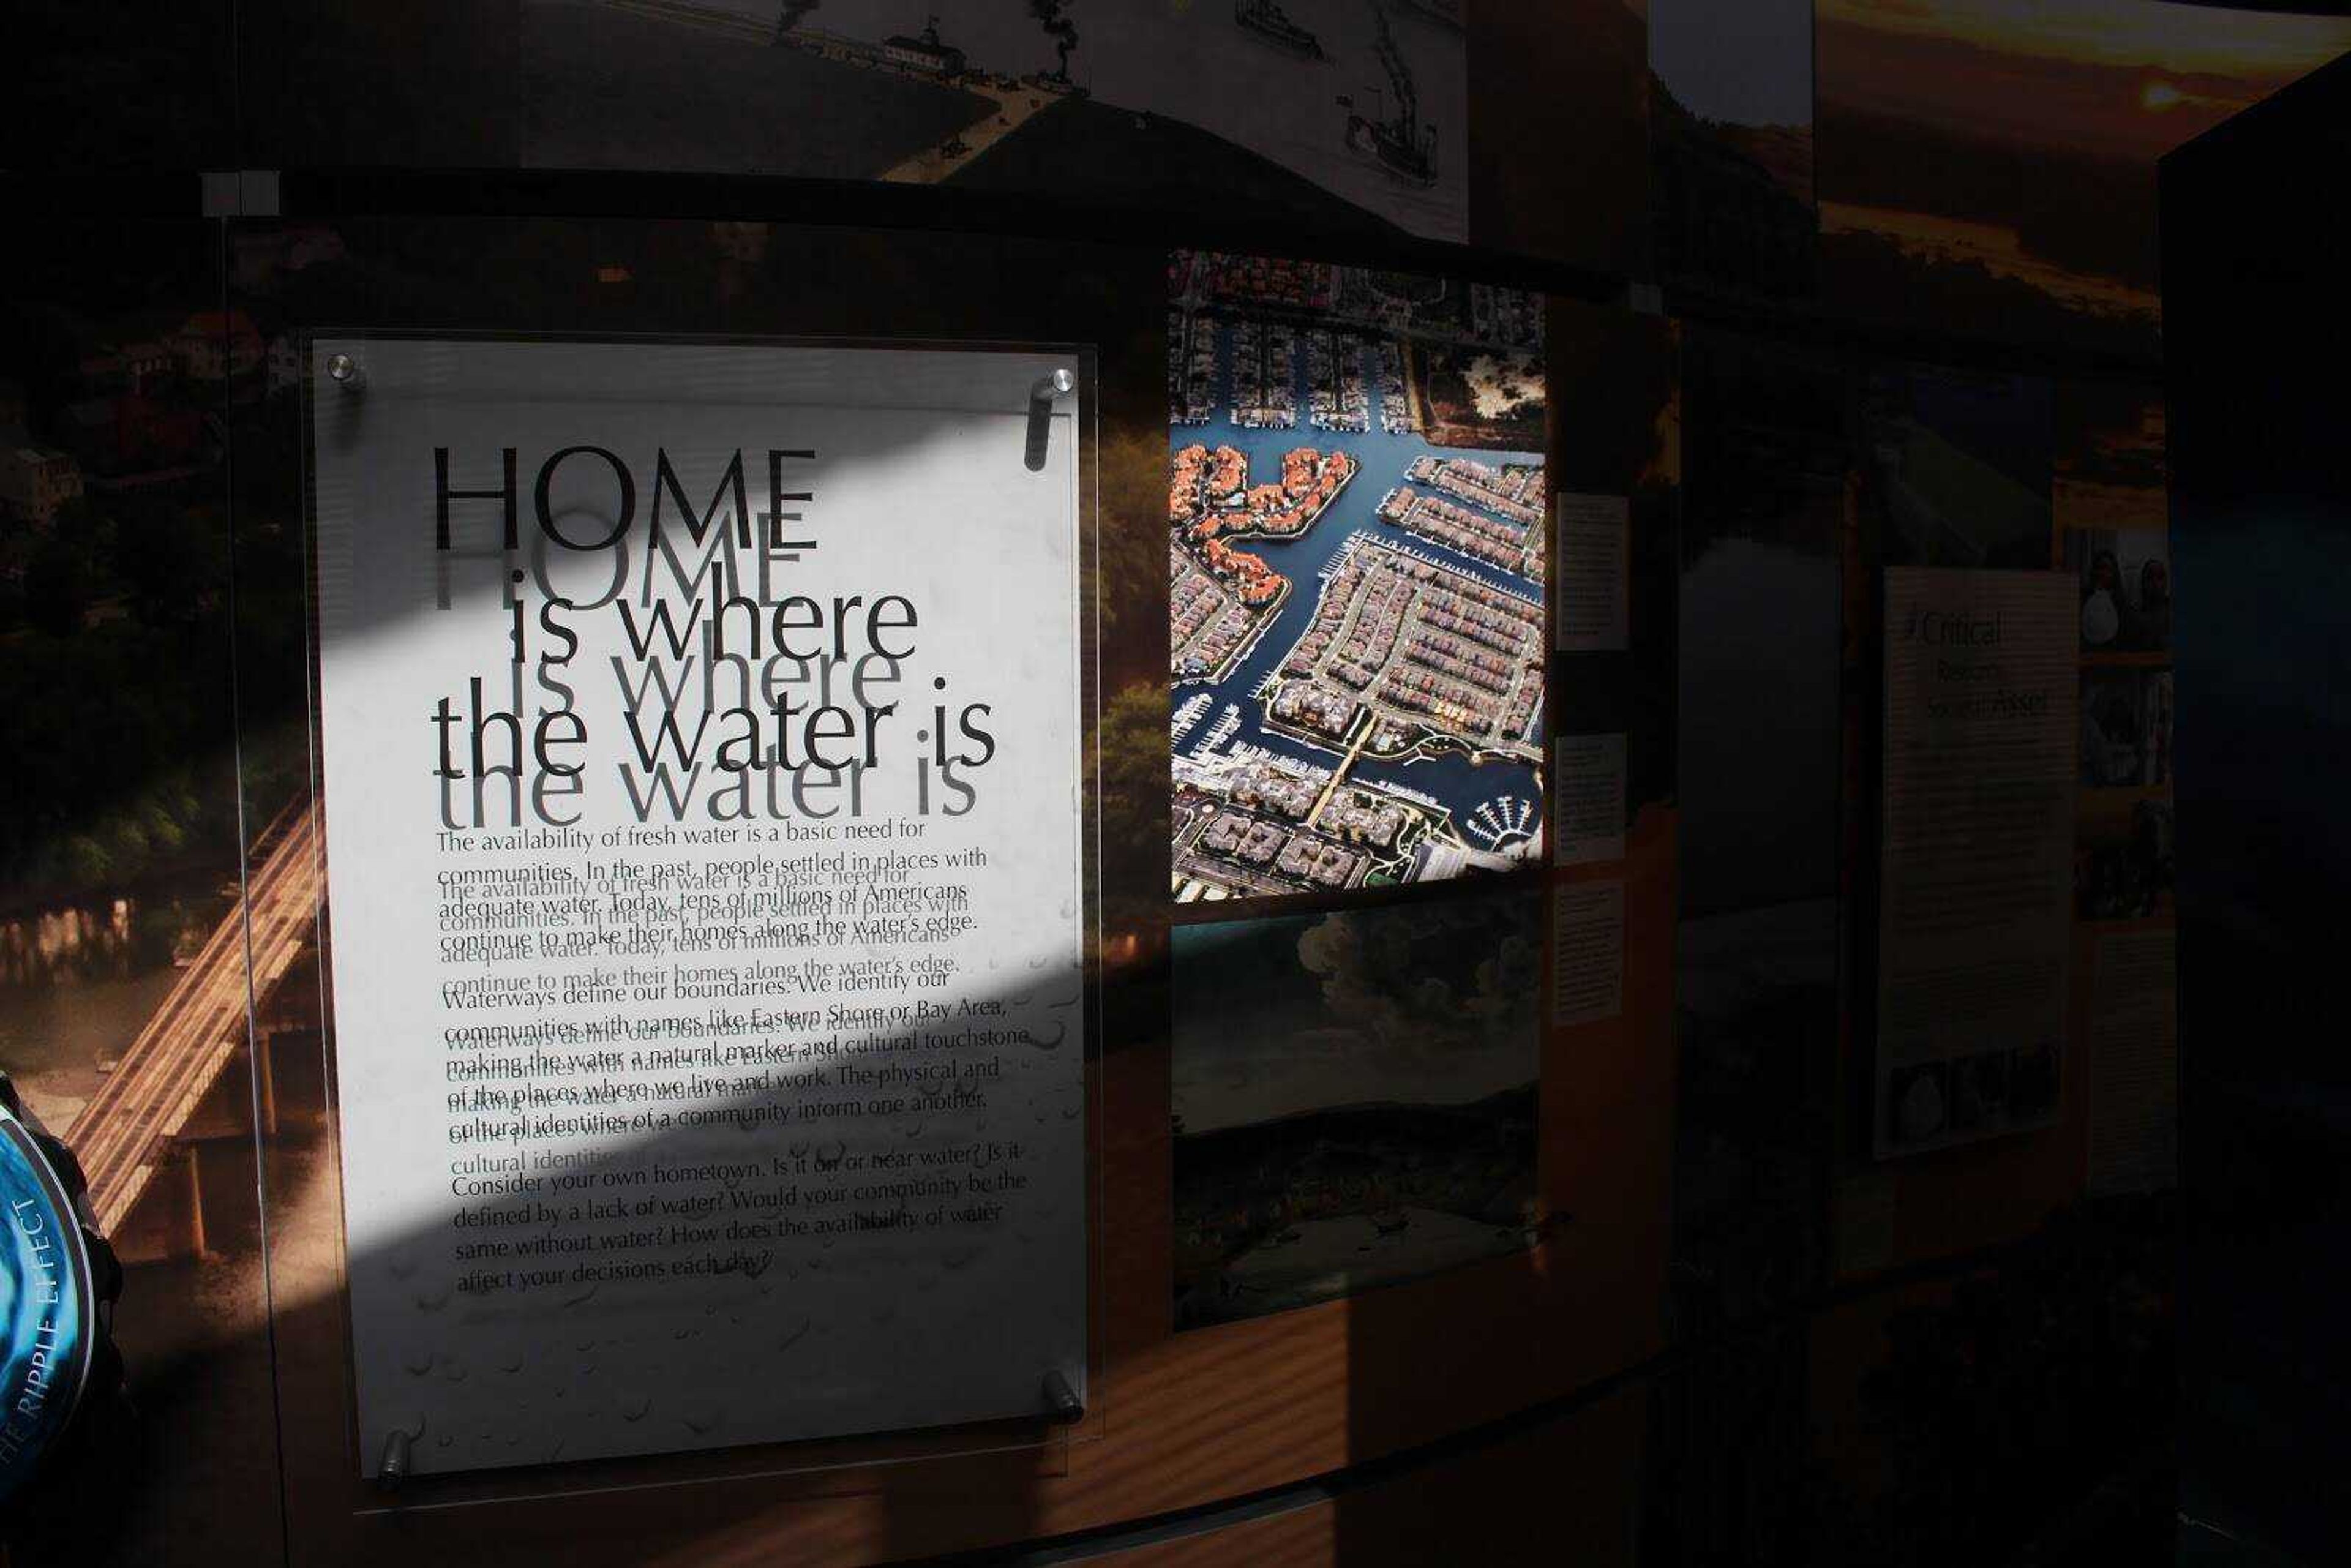 The “Water/Ways” exhibit opened on Monday, Oct. 19, 2020, at Heritage Hall in downtown Cape Girardeau. The Smithsonian feature takes up 600 square feet and explores all the different “Ways” water is a part of life.